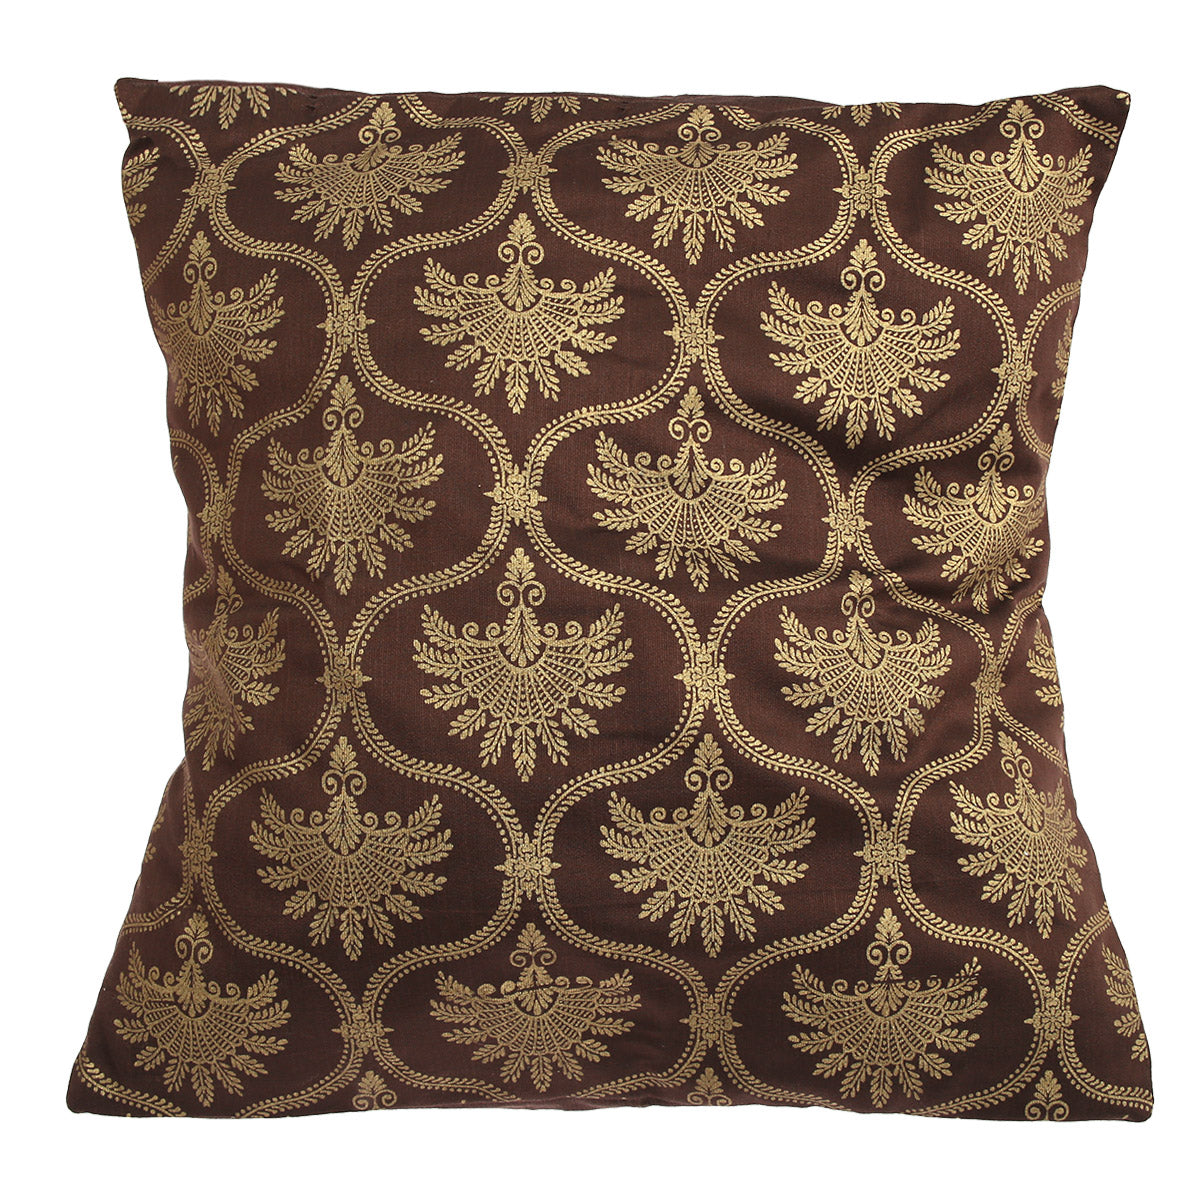 Damask Brown Cushion Cover 18x18"